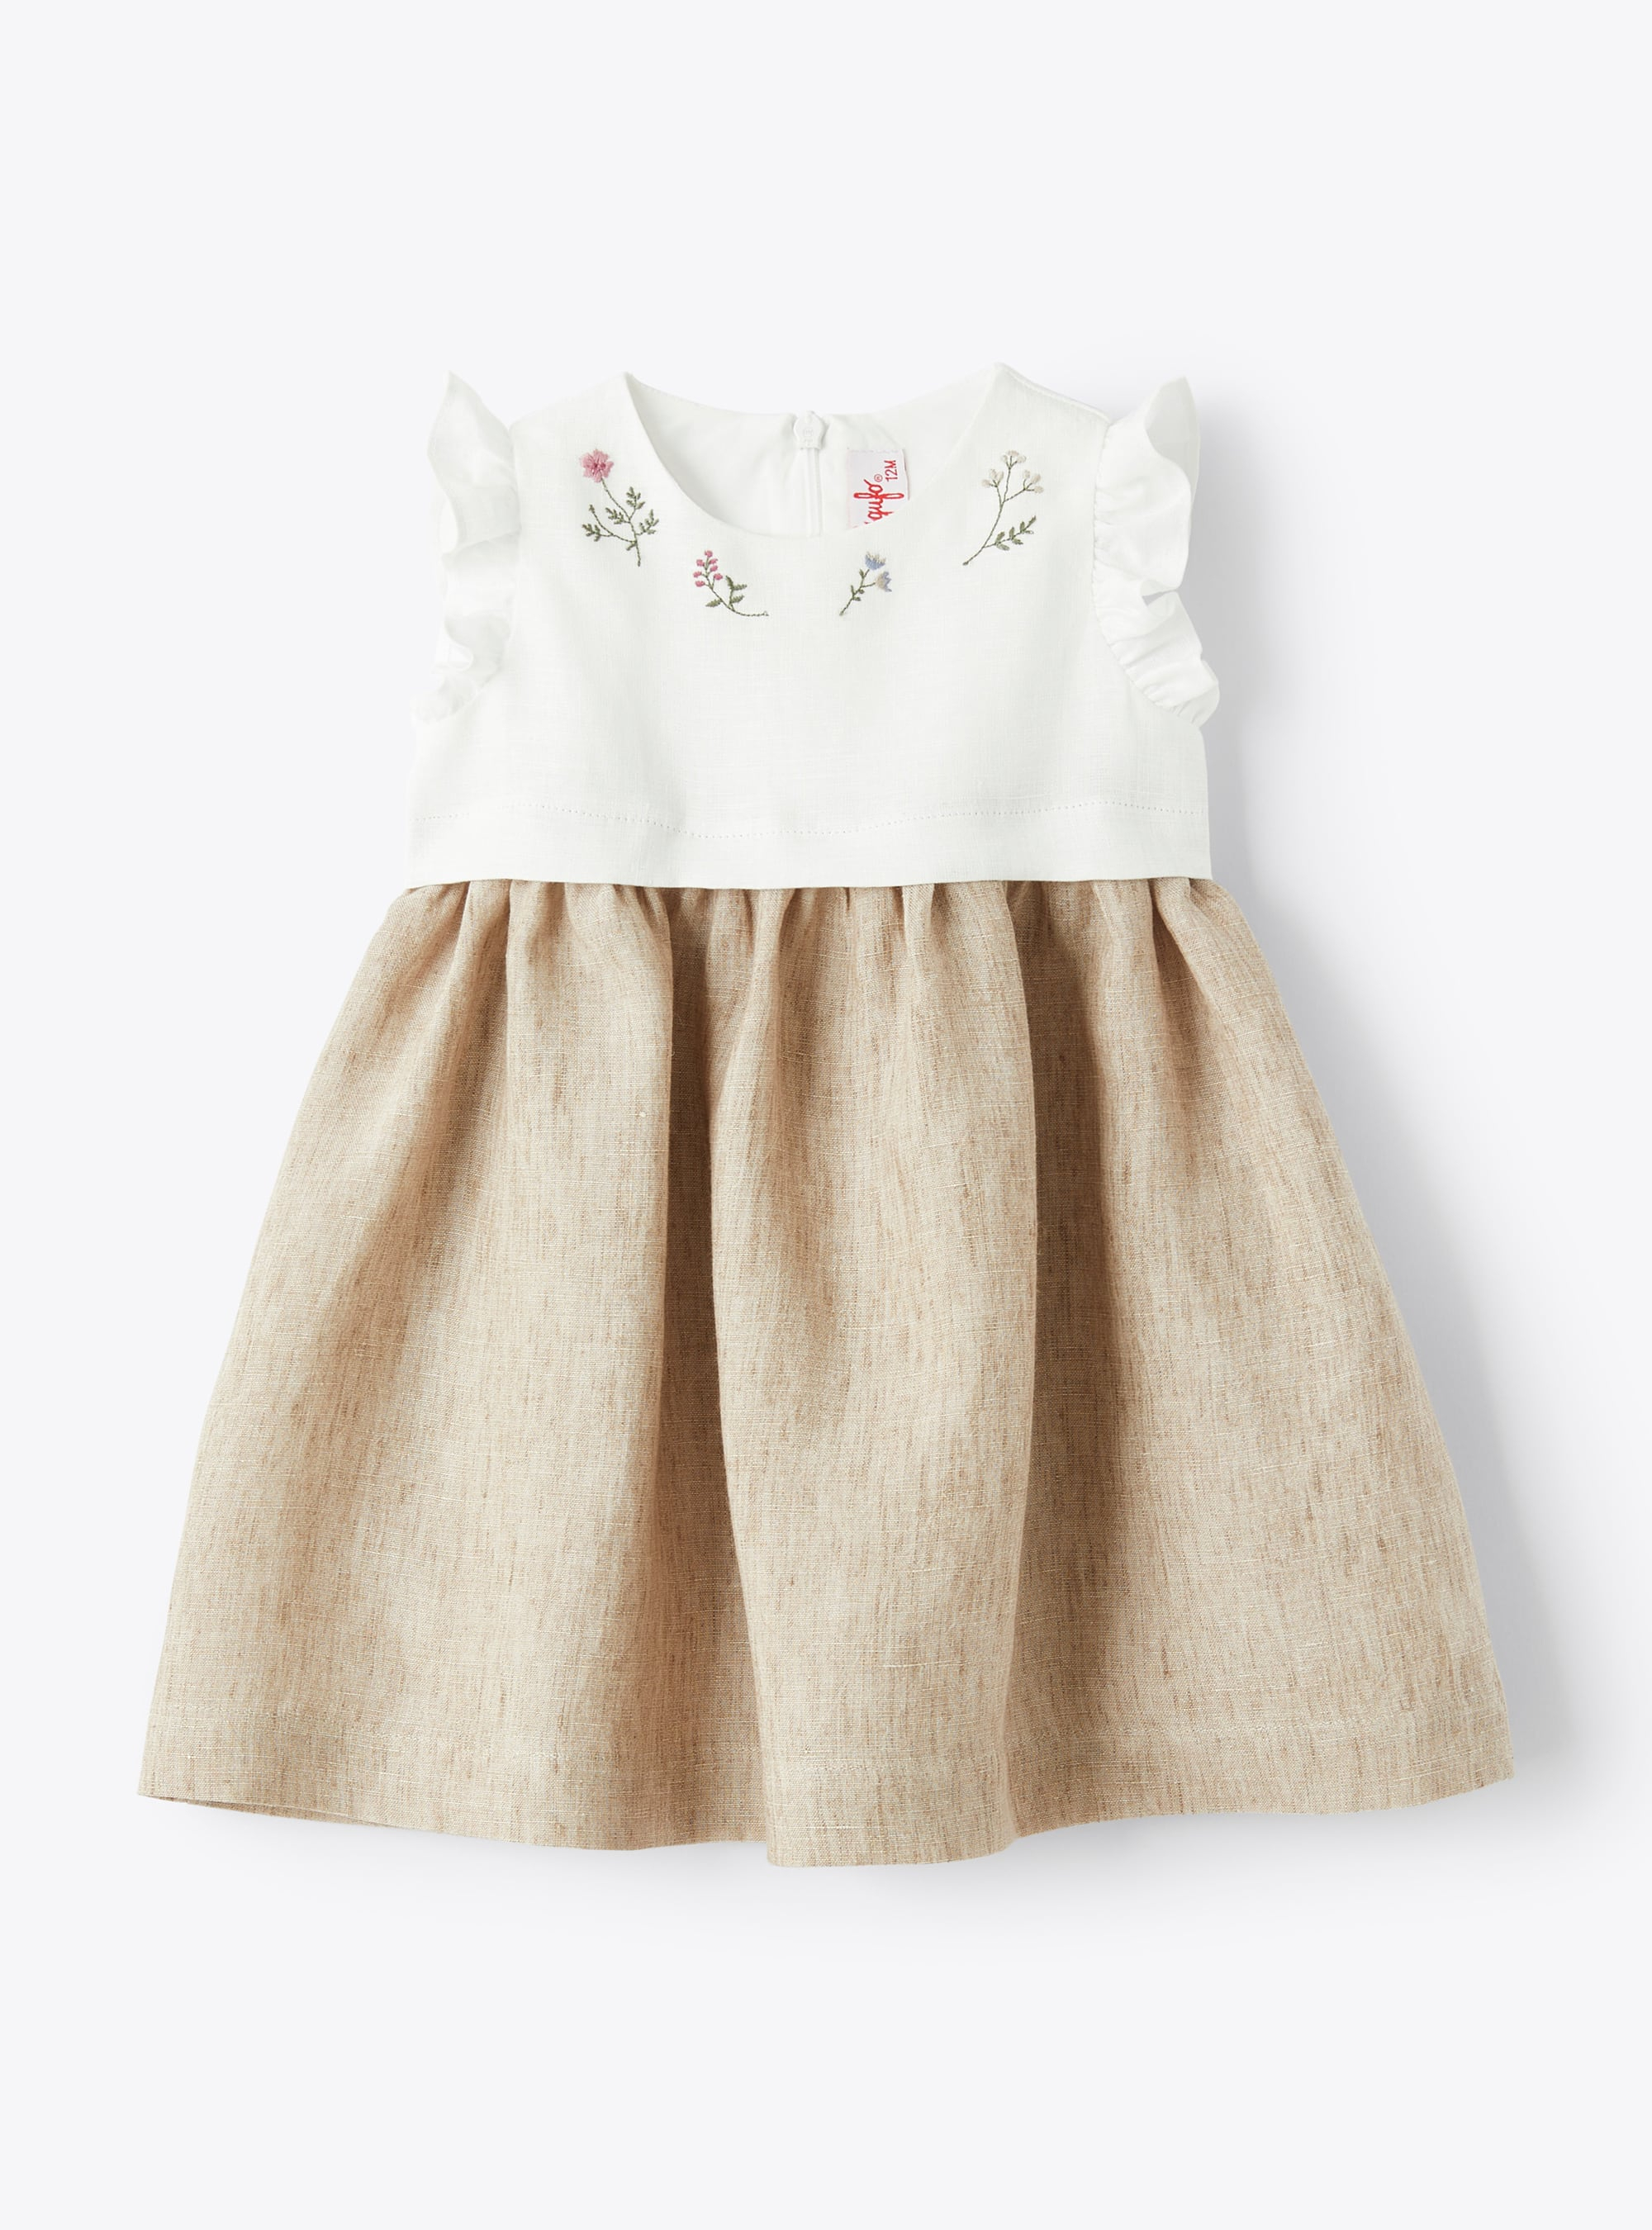 Dress for baby girls with embroidered floral detailing - Dresses - Il Gufo